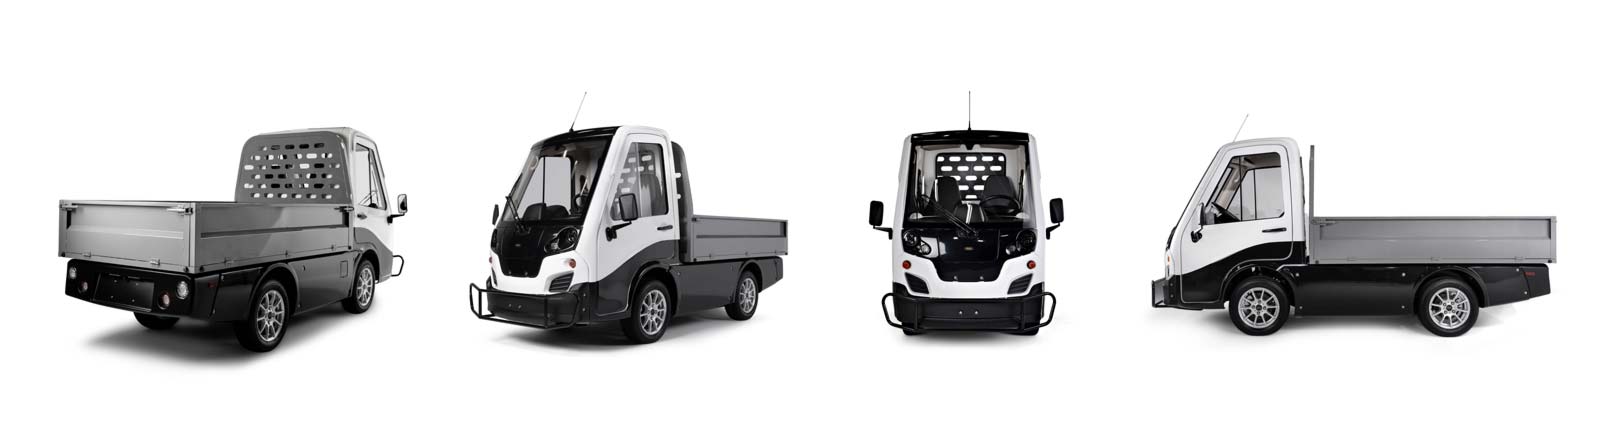 Current electric vehicle with convertible truck bed options